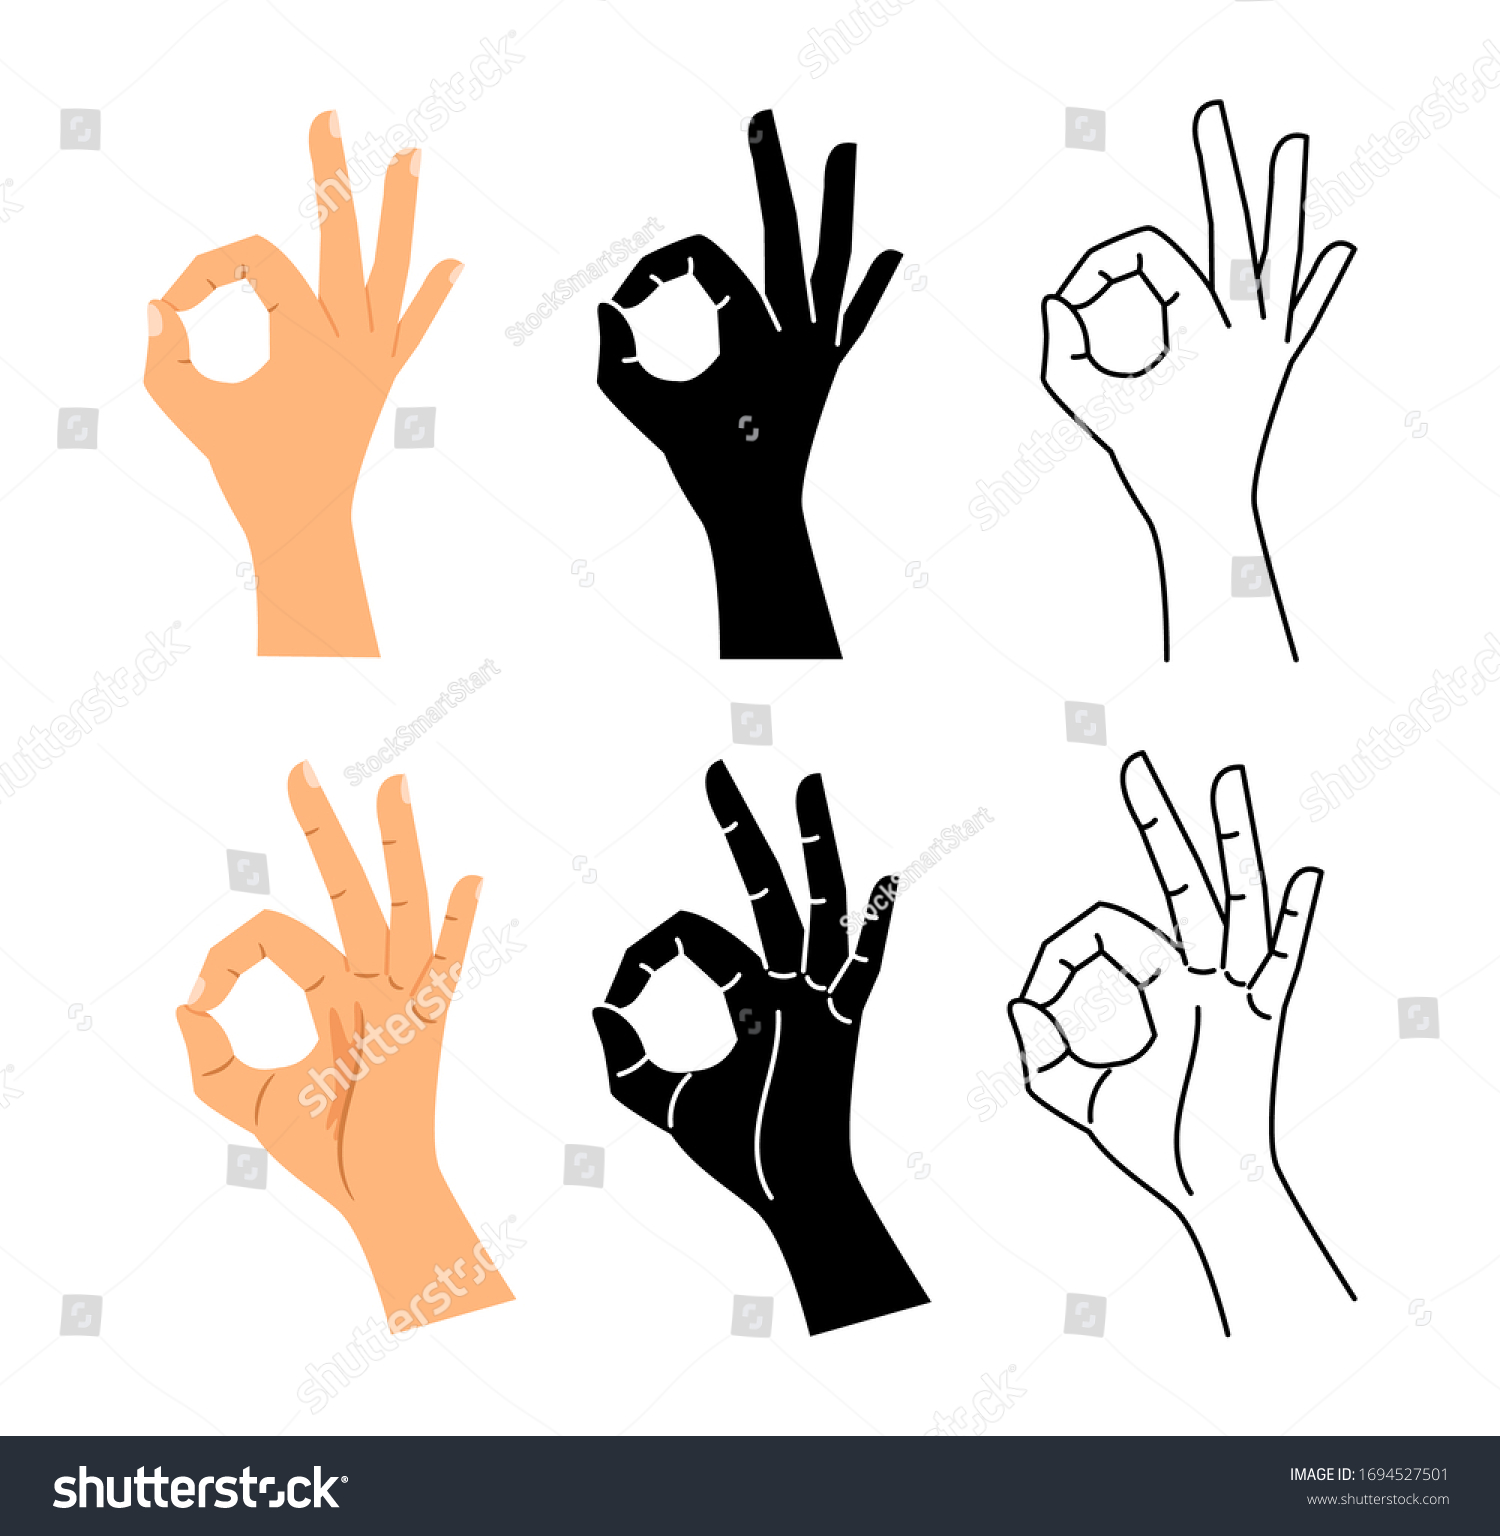 Hand gesture. Ok hand sign illustration. Isolated Okay, agree or perfect black line symbol vector set #1694527501